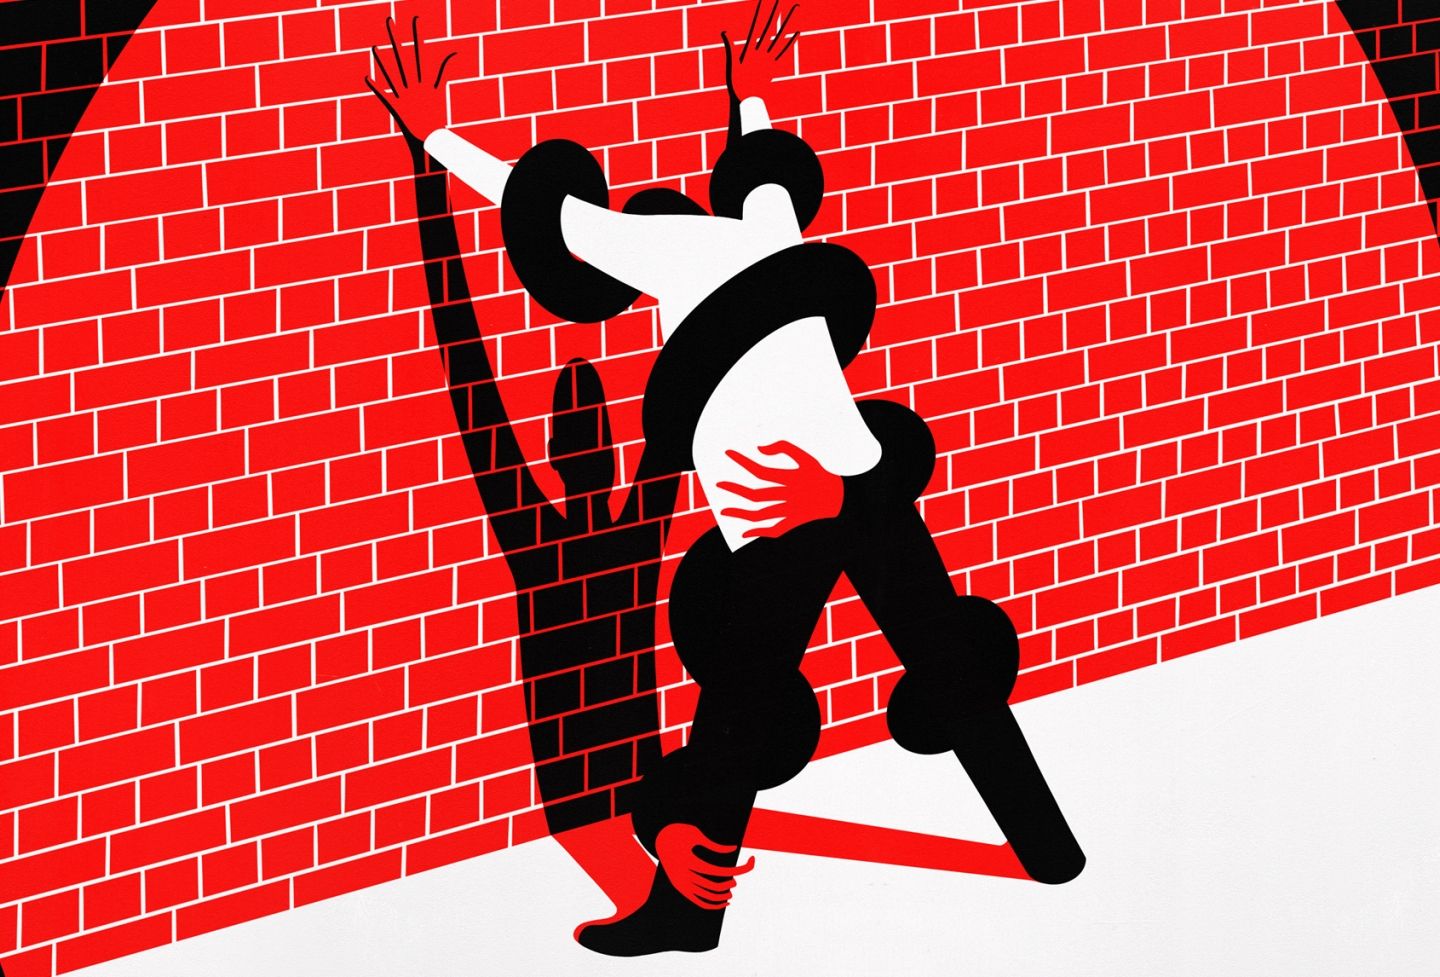 An illustration of a man standing with his hands up against a wall.